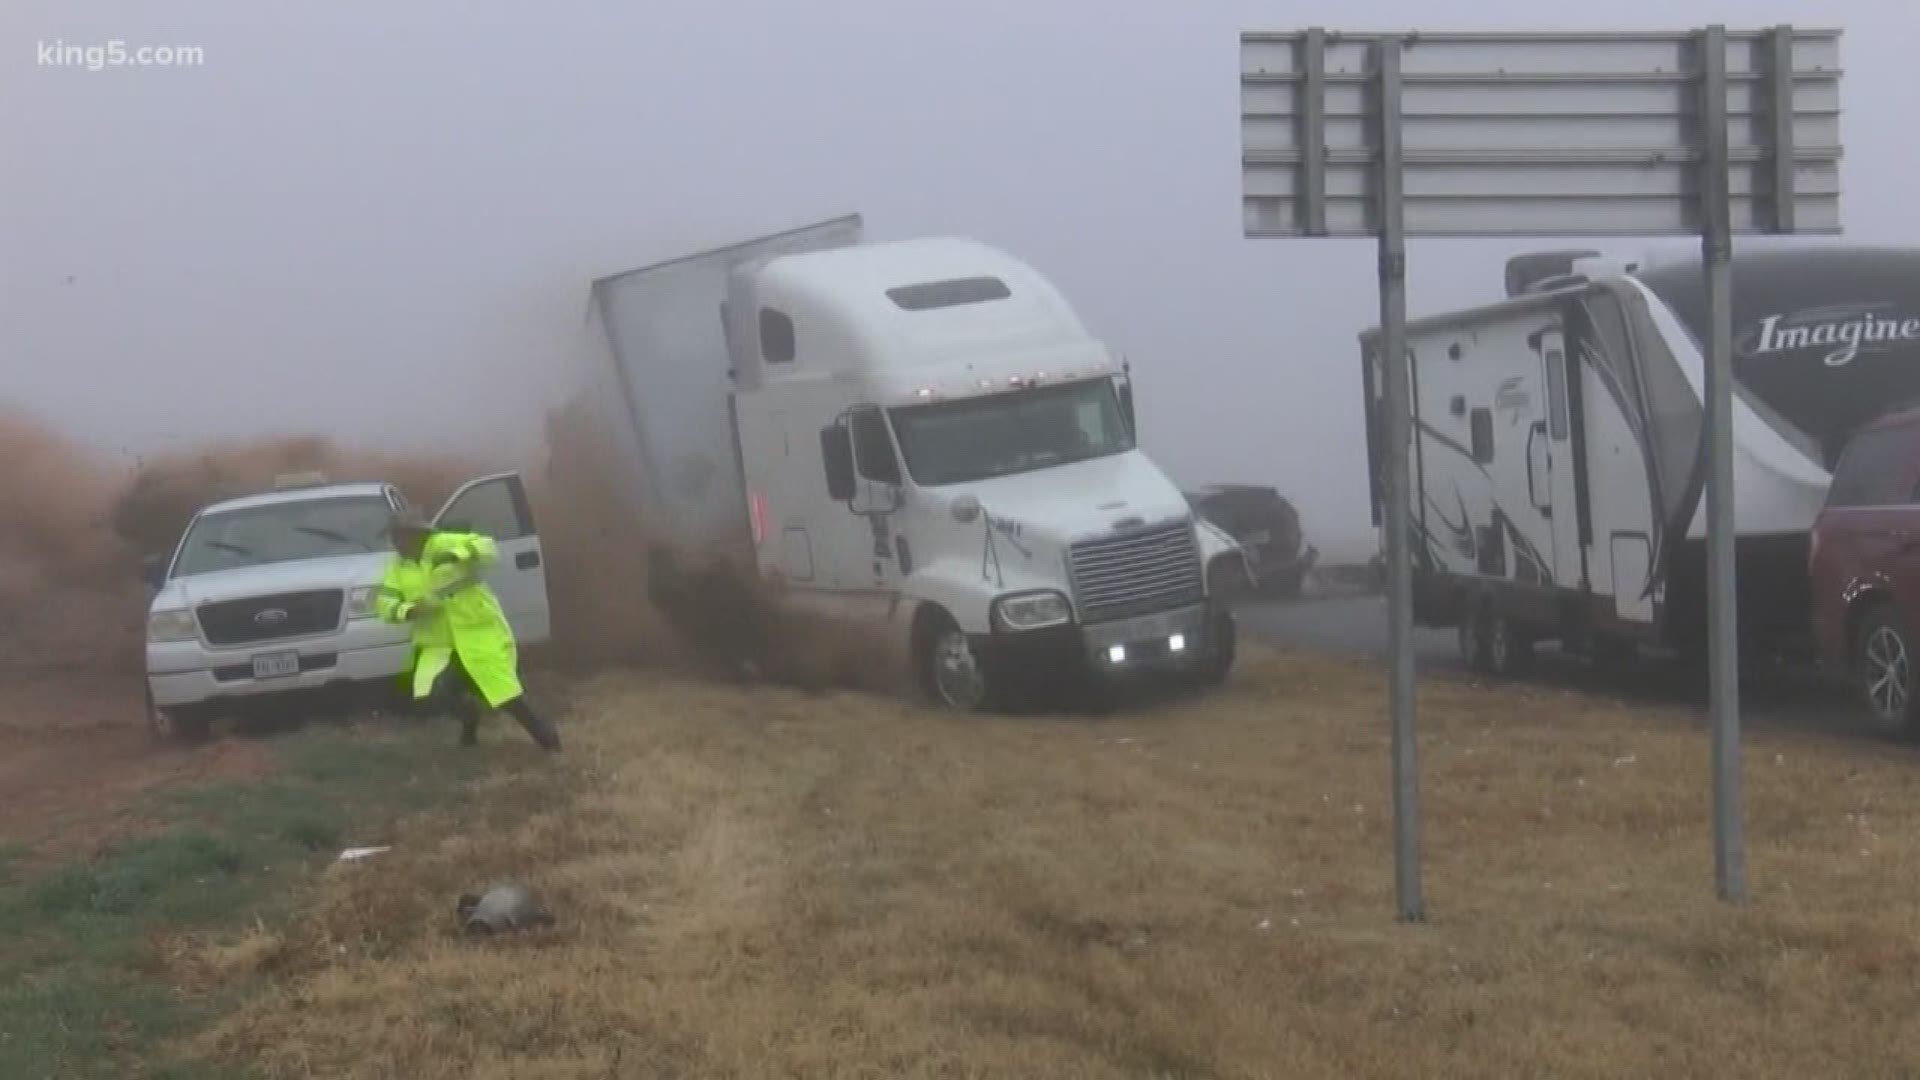 A tractor trailer speeding down a highway loses control as the driver tries to avoid a major pileup.
It happened in Lubbock County, Texas.